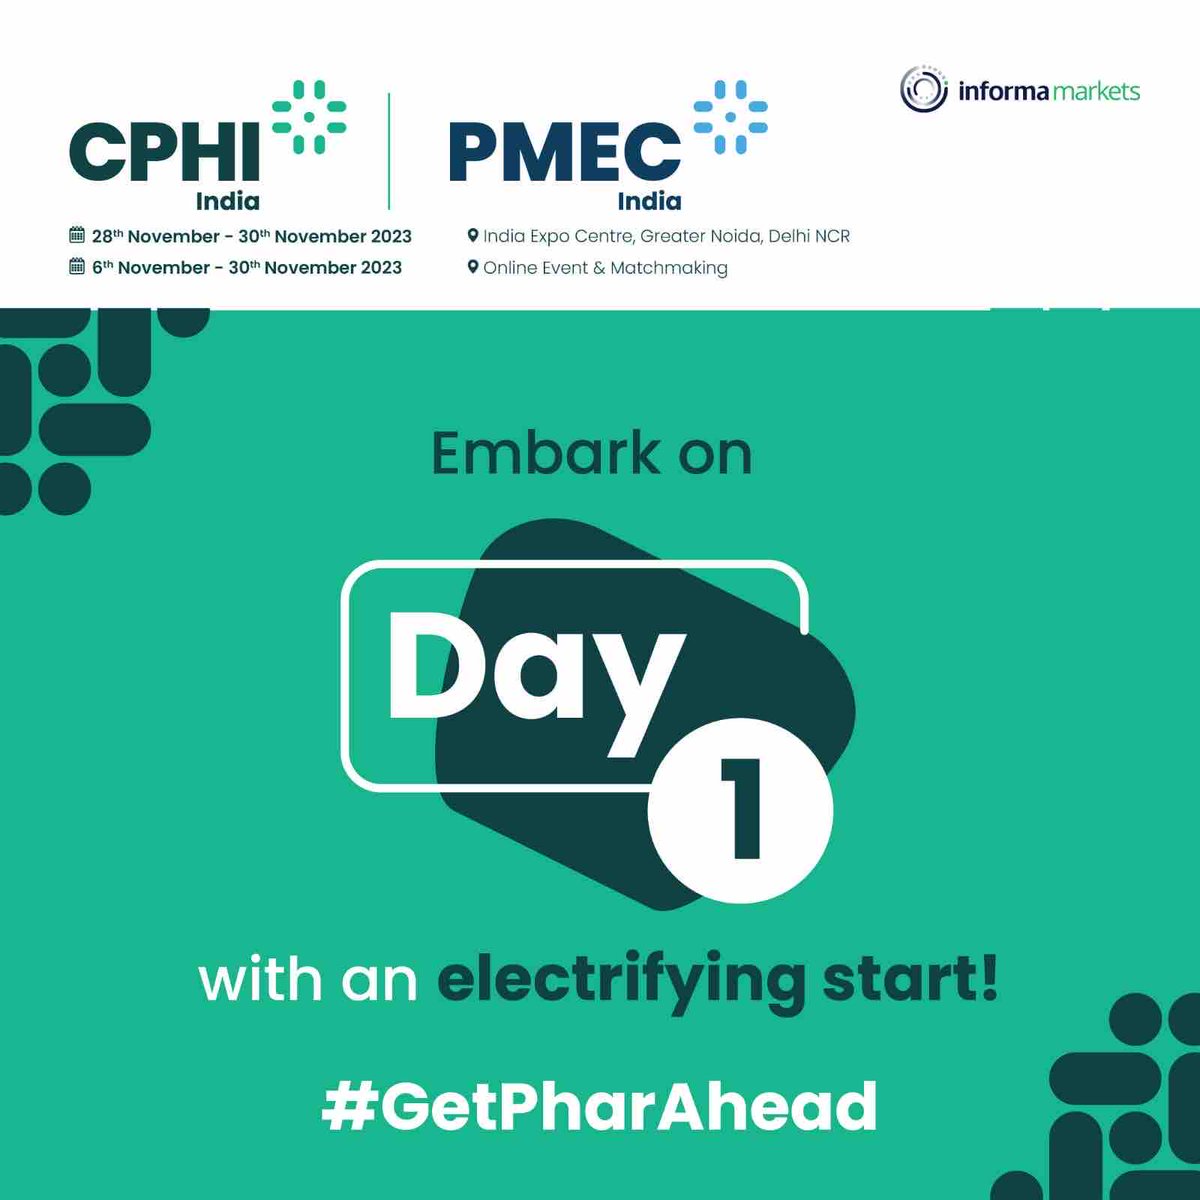 Charged up for day 1 : Let’s start the CPHI & PMEC India’s journey with an electrifying start.

#IEML #Indiaexpocentre #GetPharAhead
#CPHI2023 #PMEC2023 #PharmaIndustry #Innovation #Collaboration #GetPharAhead #CPHI #PMEC #PharmaCommunity #PharmaInnovation #DelhiNCR